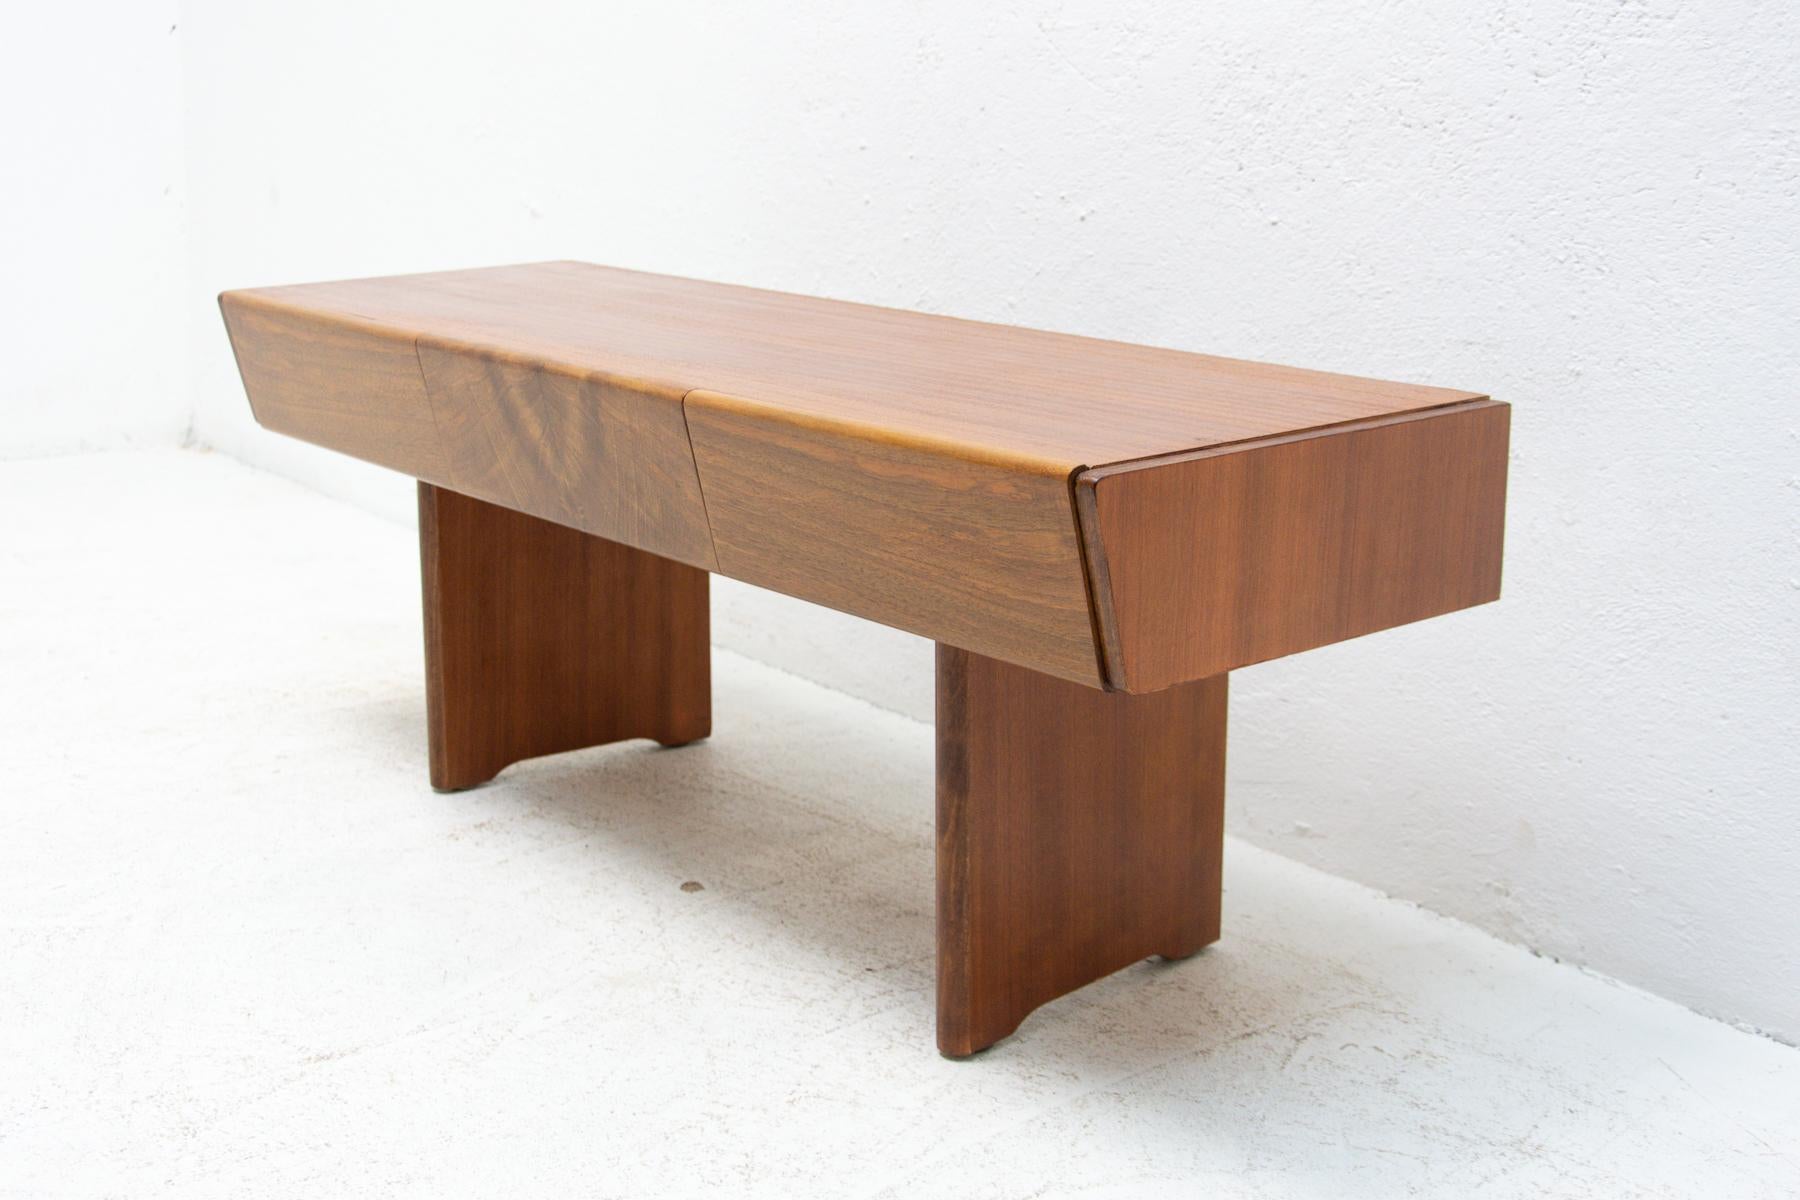 Walnut side table with drawers, 1970´s, made in Czechoslovakia. In excellent condition, fully renovated.